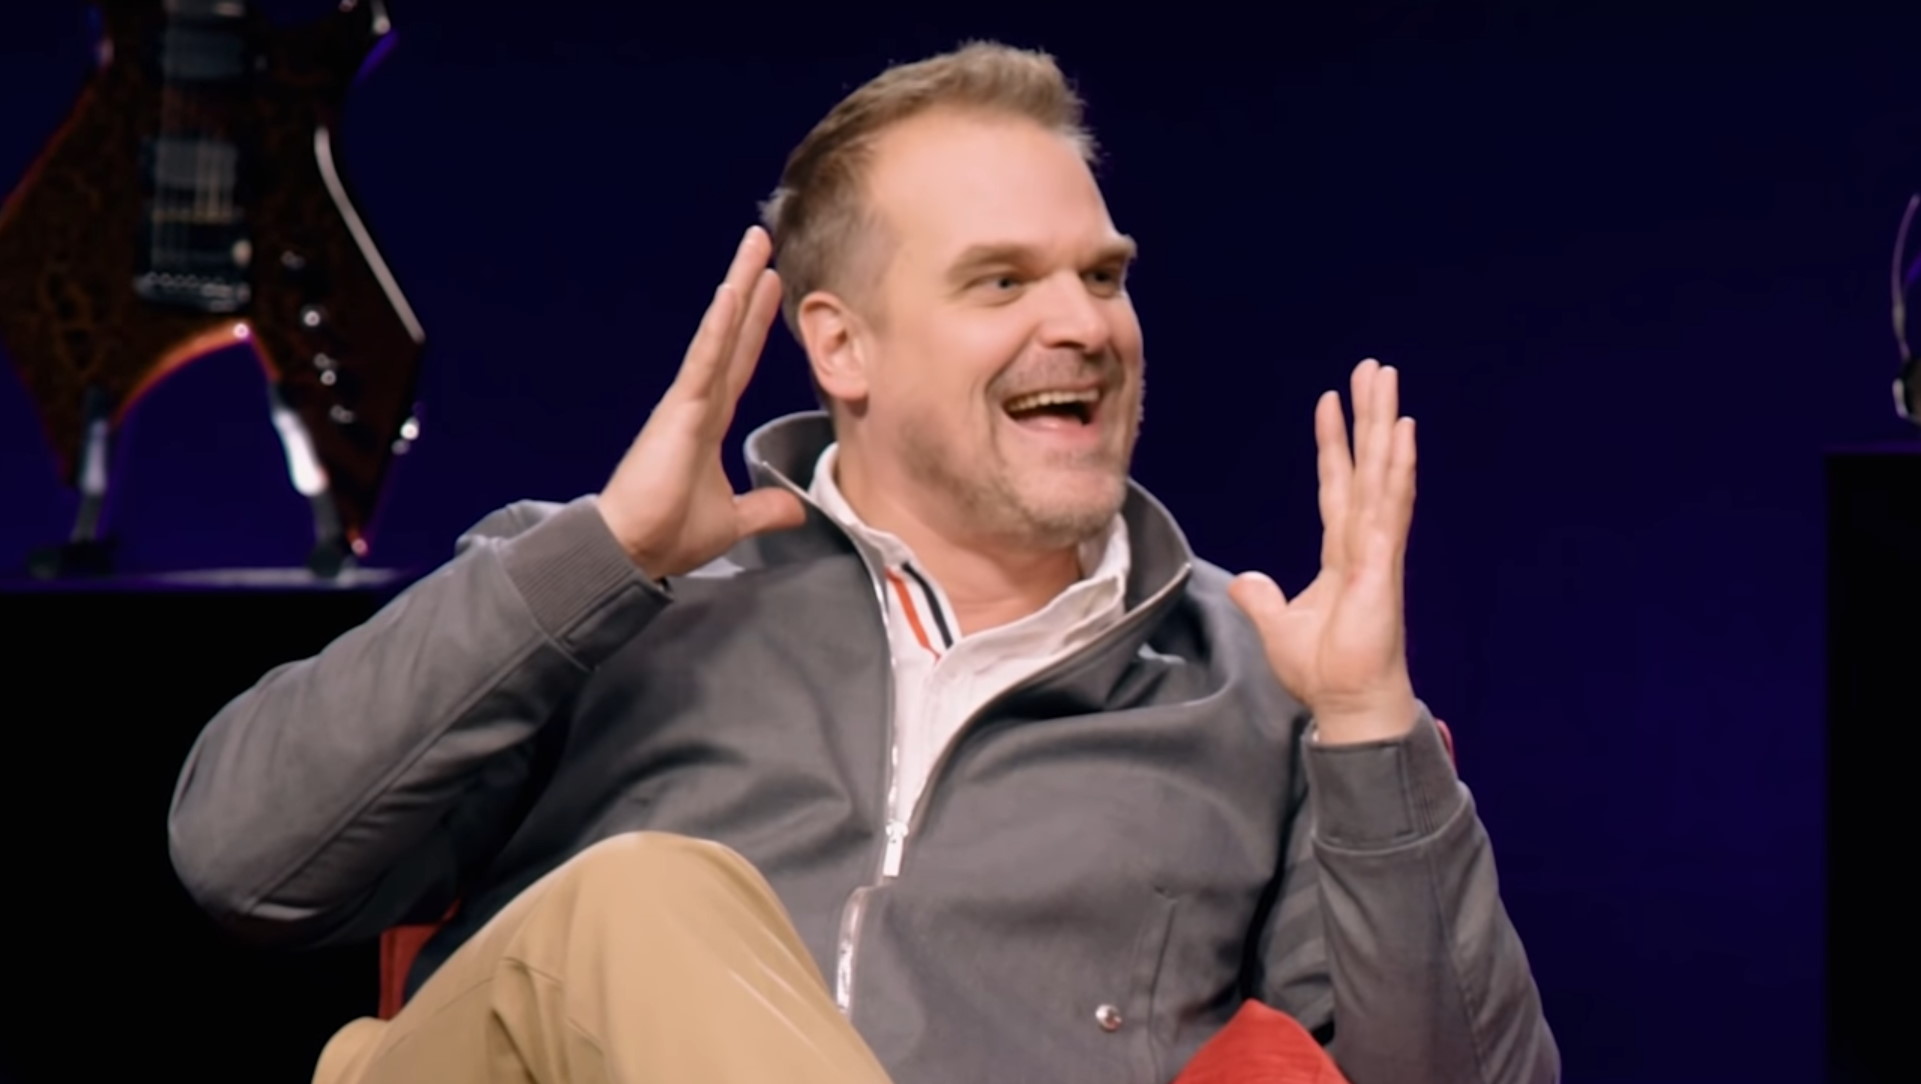  David Harbour says World of Warcraft 'ruined my life' 